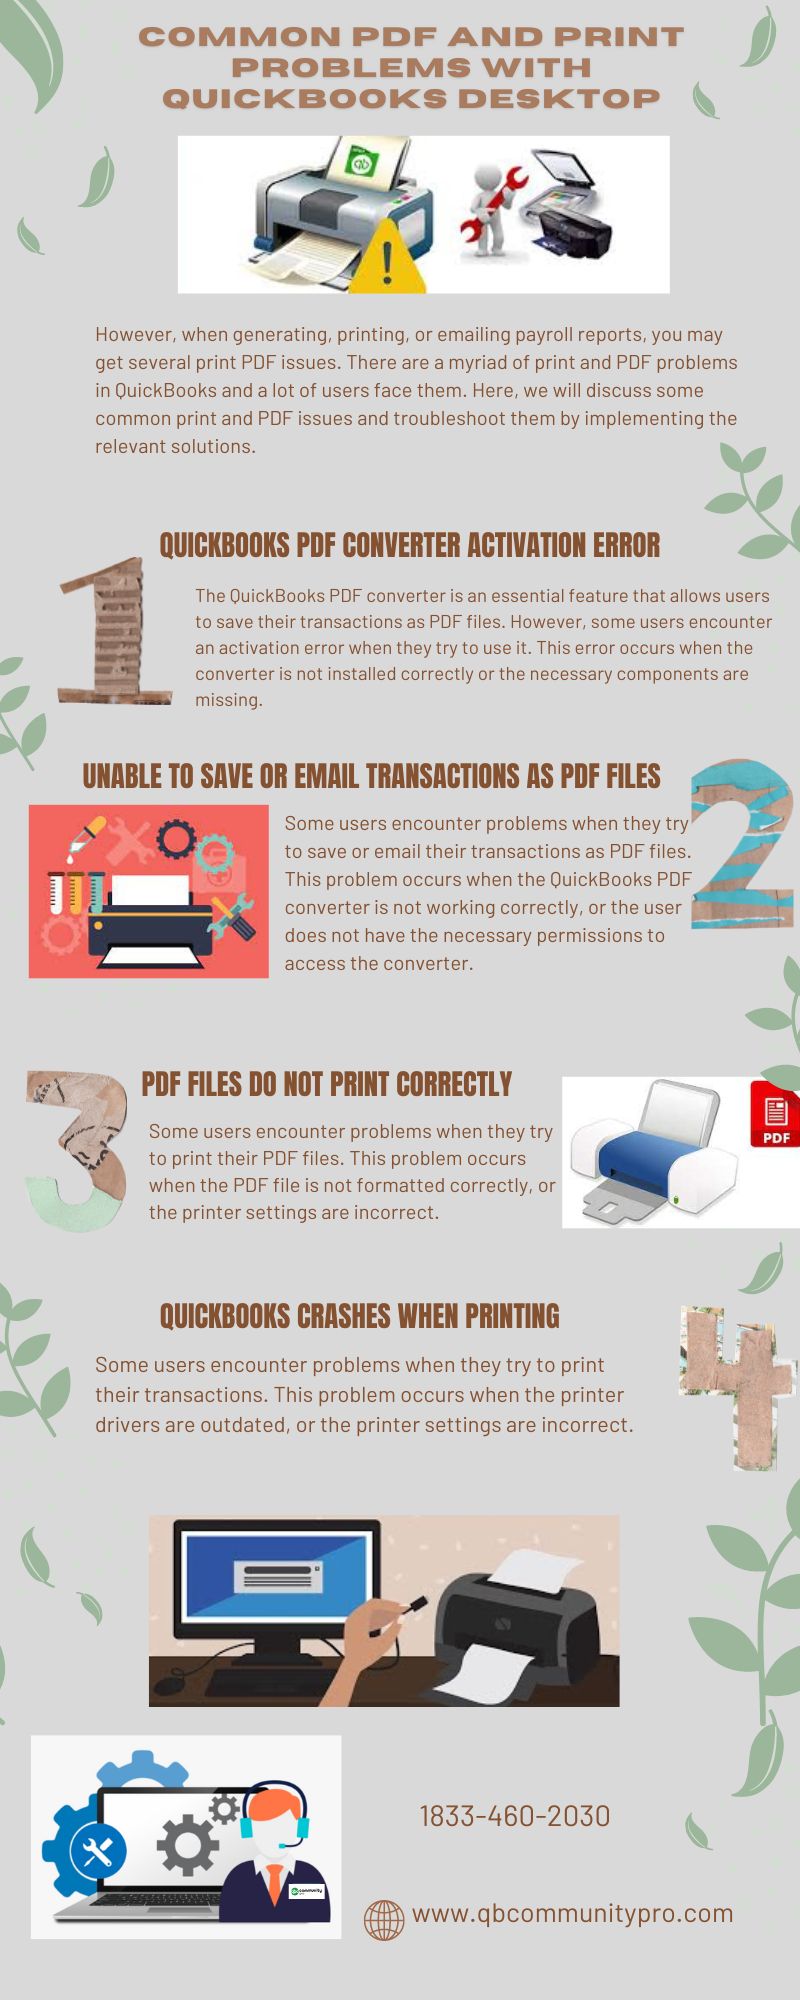 Image shows the common PDF and Print problems with QuickBooks Desktop